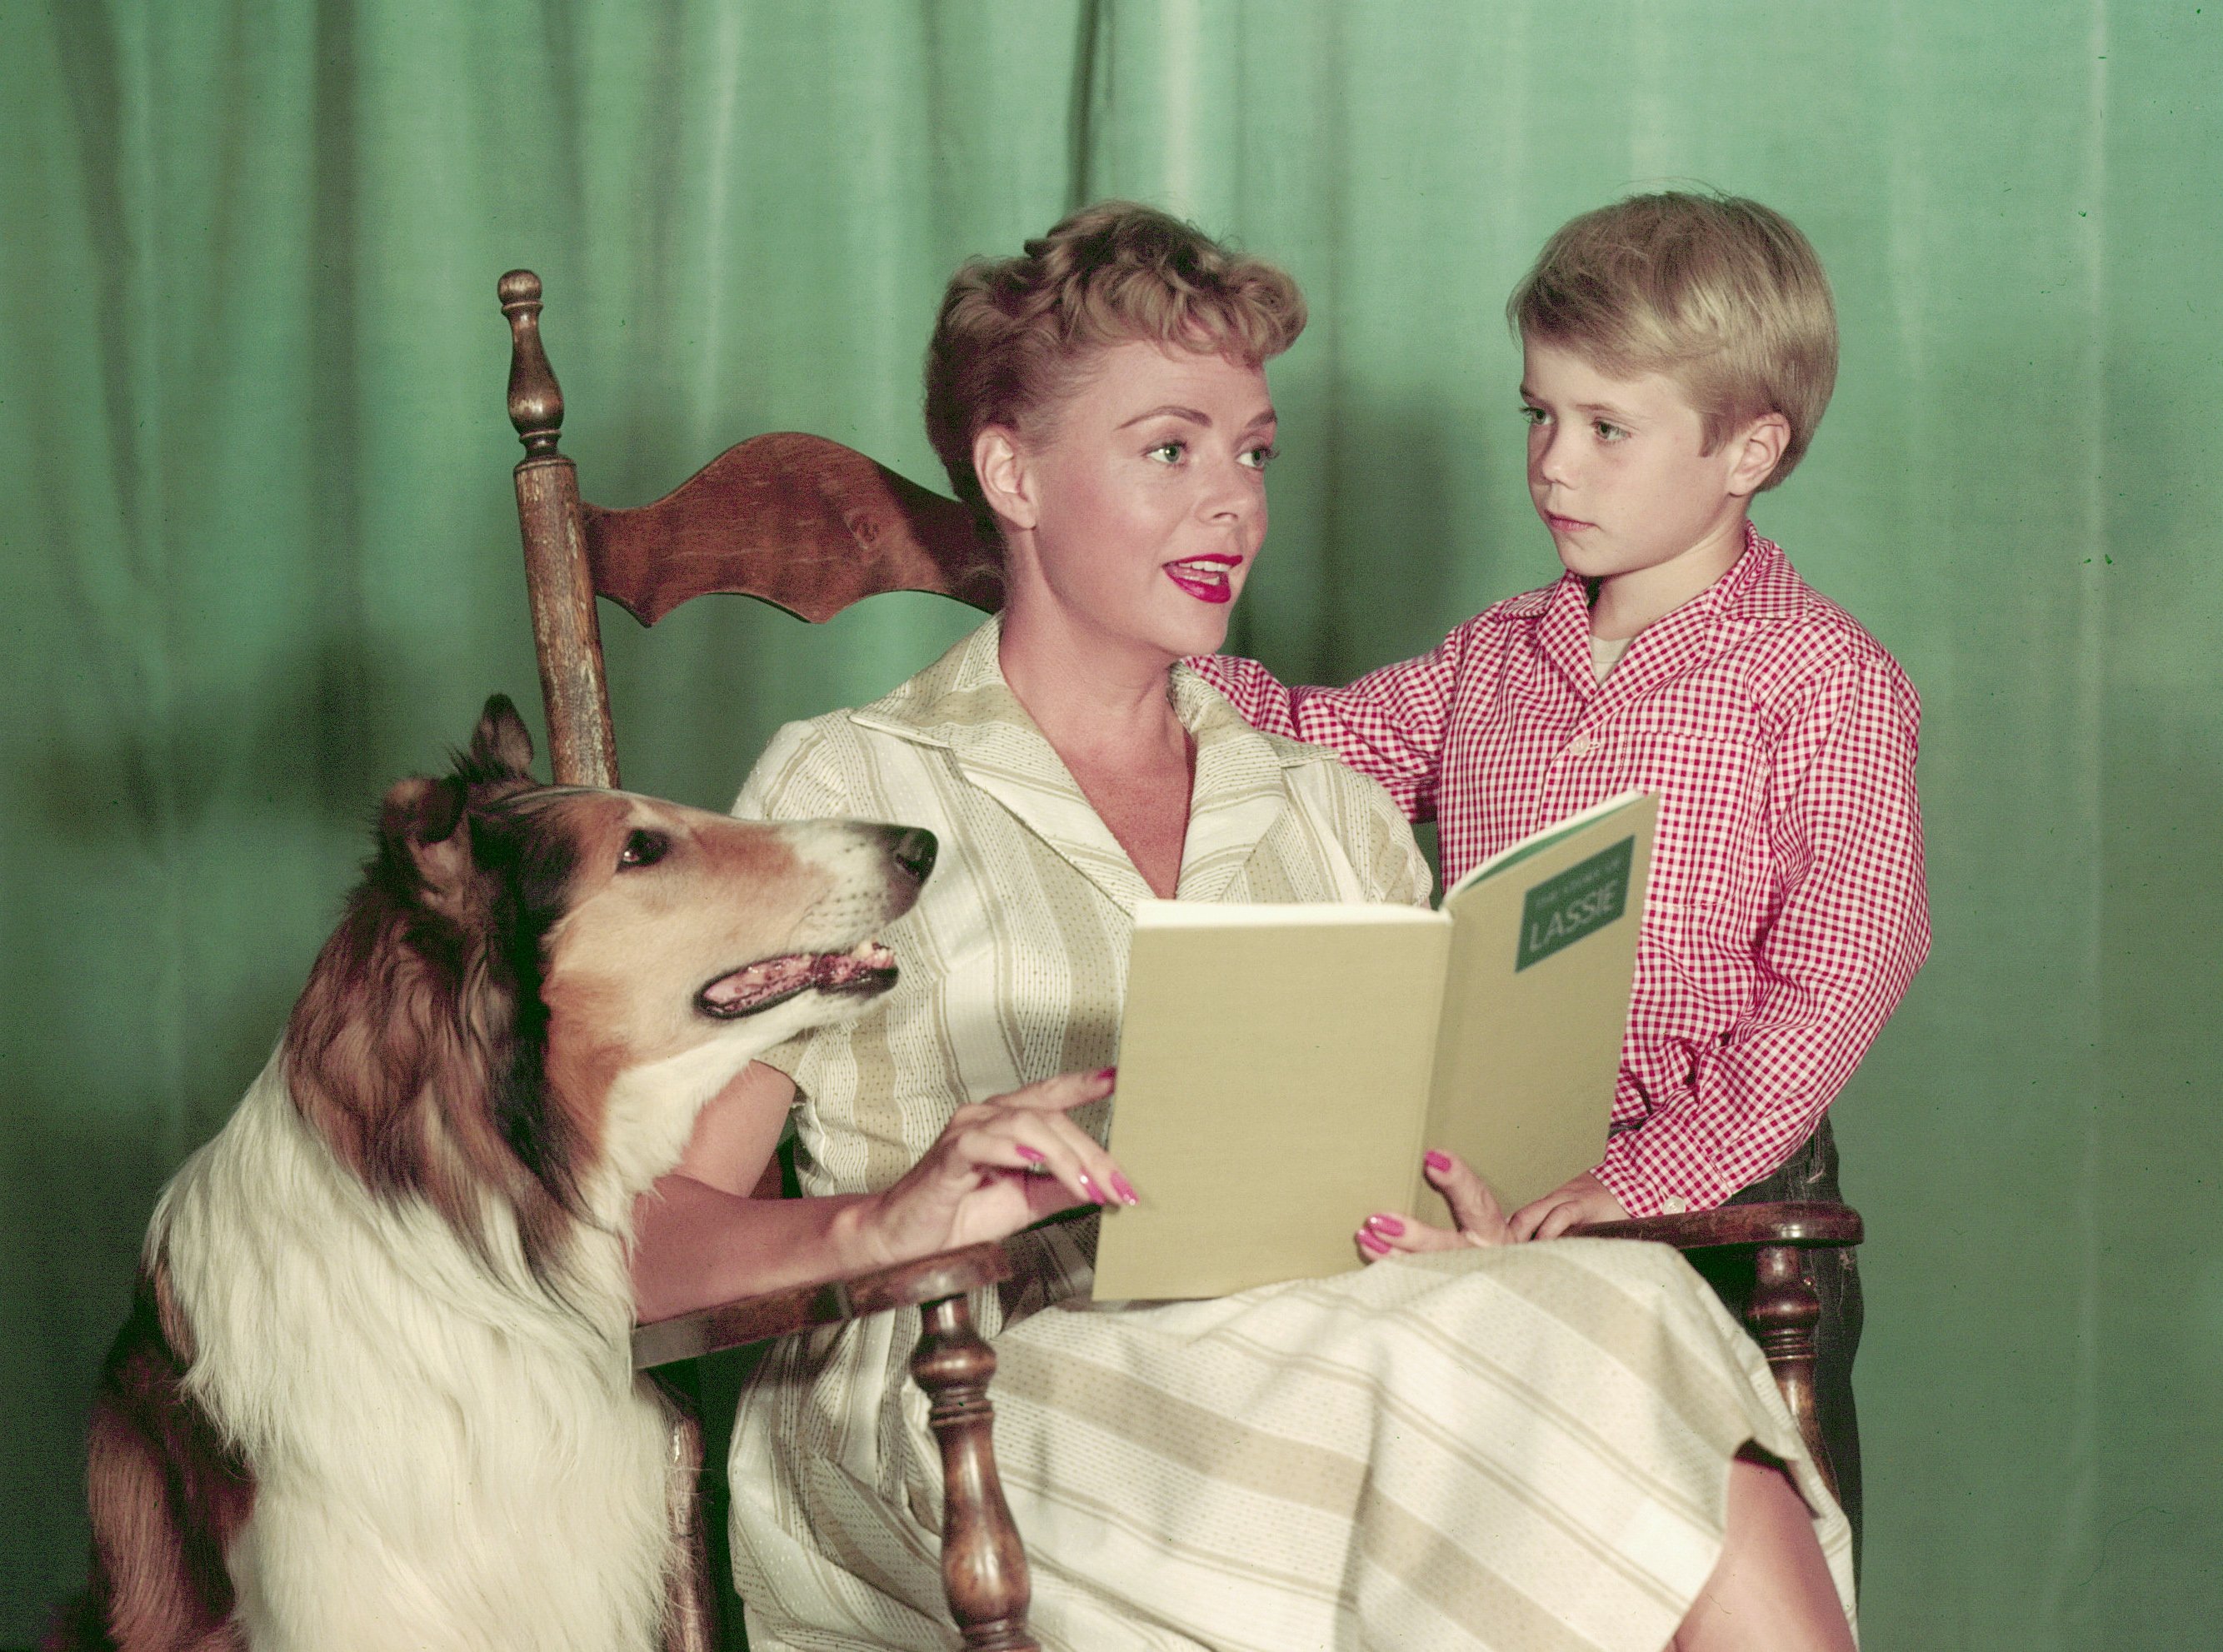 Baby, as Lassie, June Lockhart, as Ruth Martin, and Jon Provost, as Timmy Martin in a promotional portrait for "Lassie," in 1960. | Source: CBS Photo Archive/Getty Images